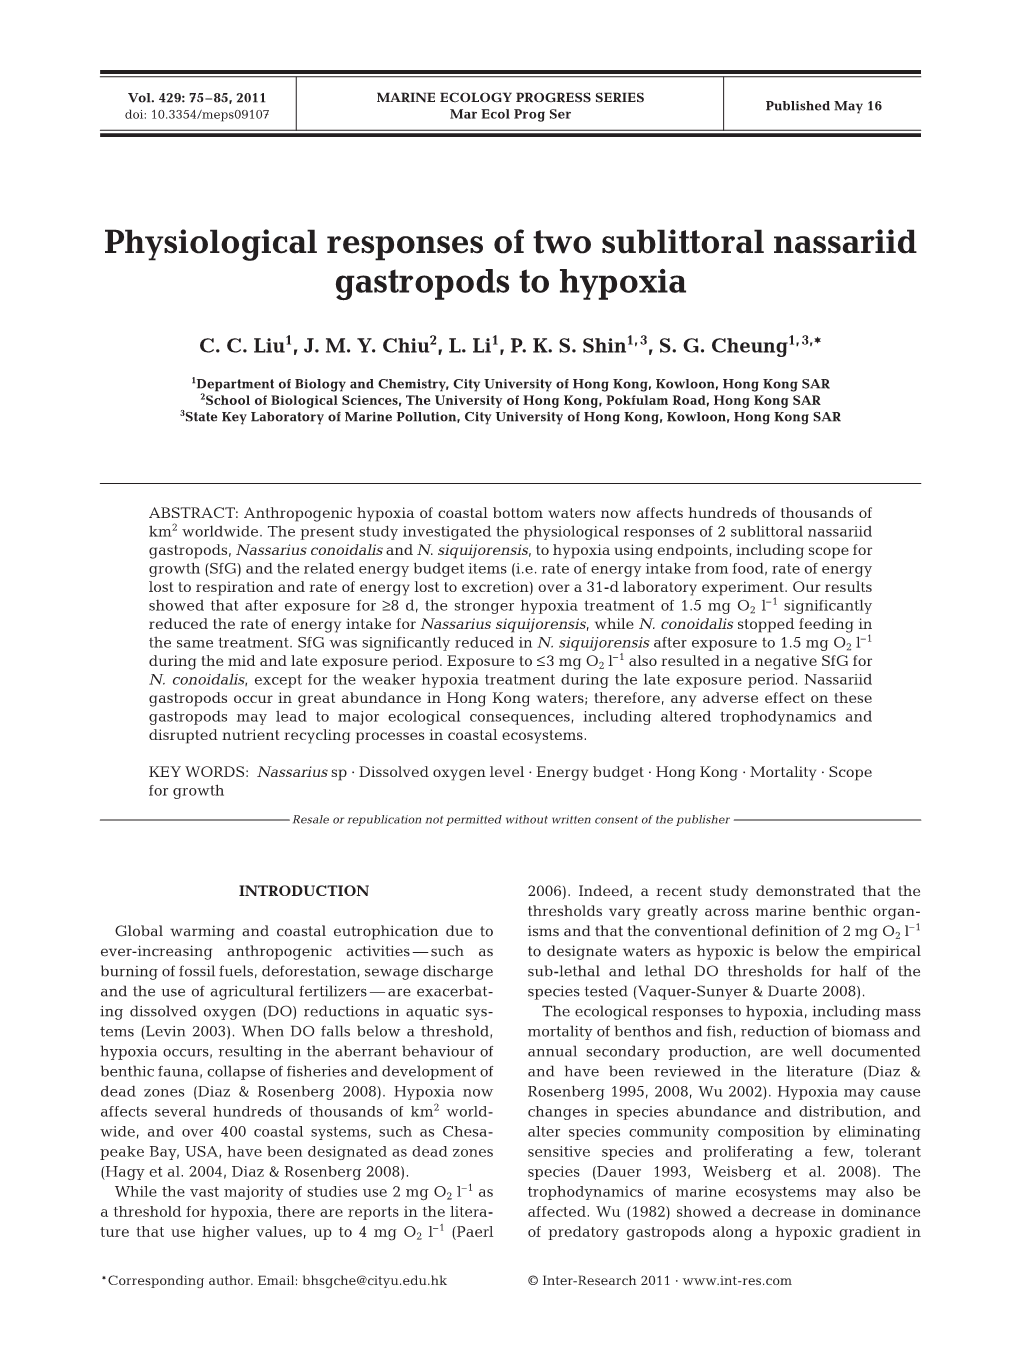 Physiological Responses of Two Sublittoral Nassariid Gastropods to Hypoxia